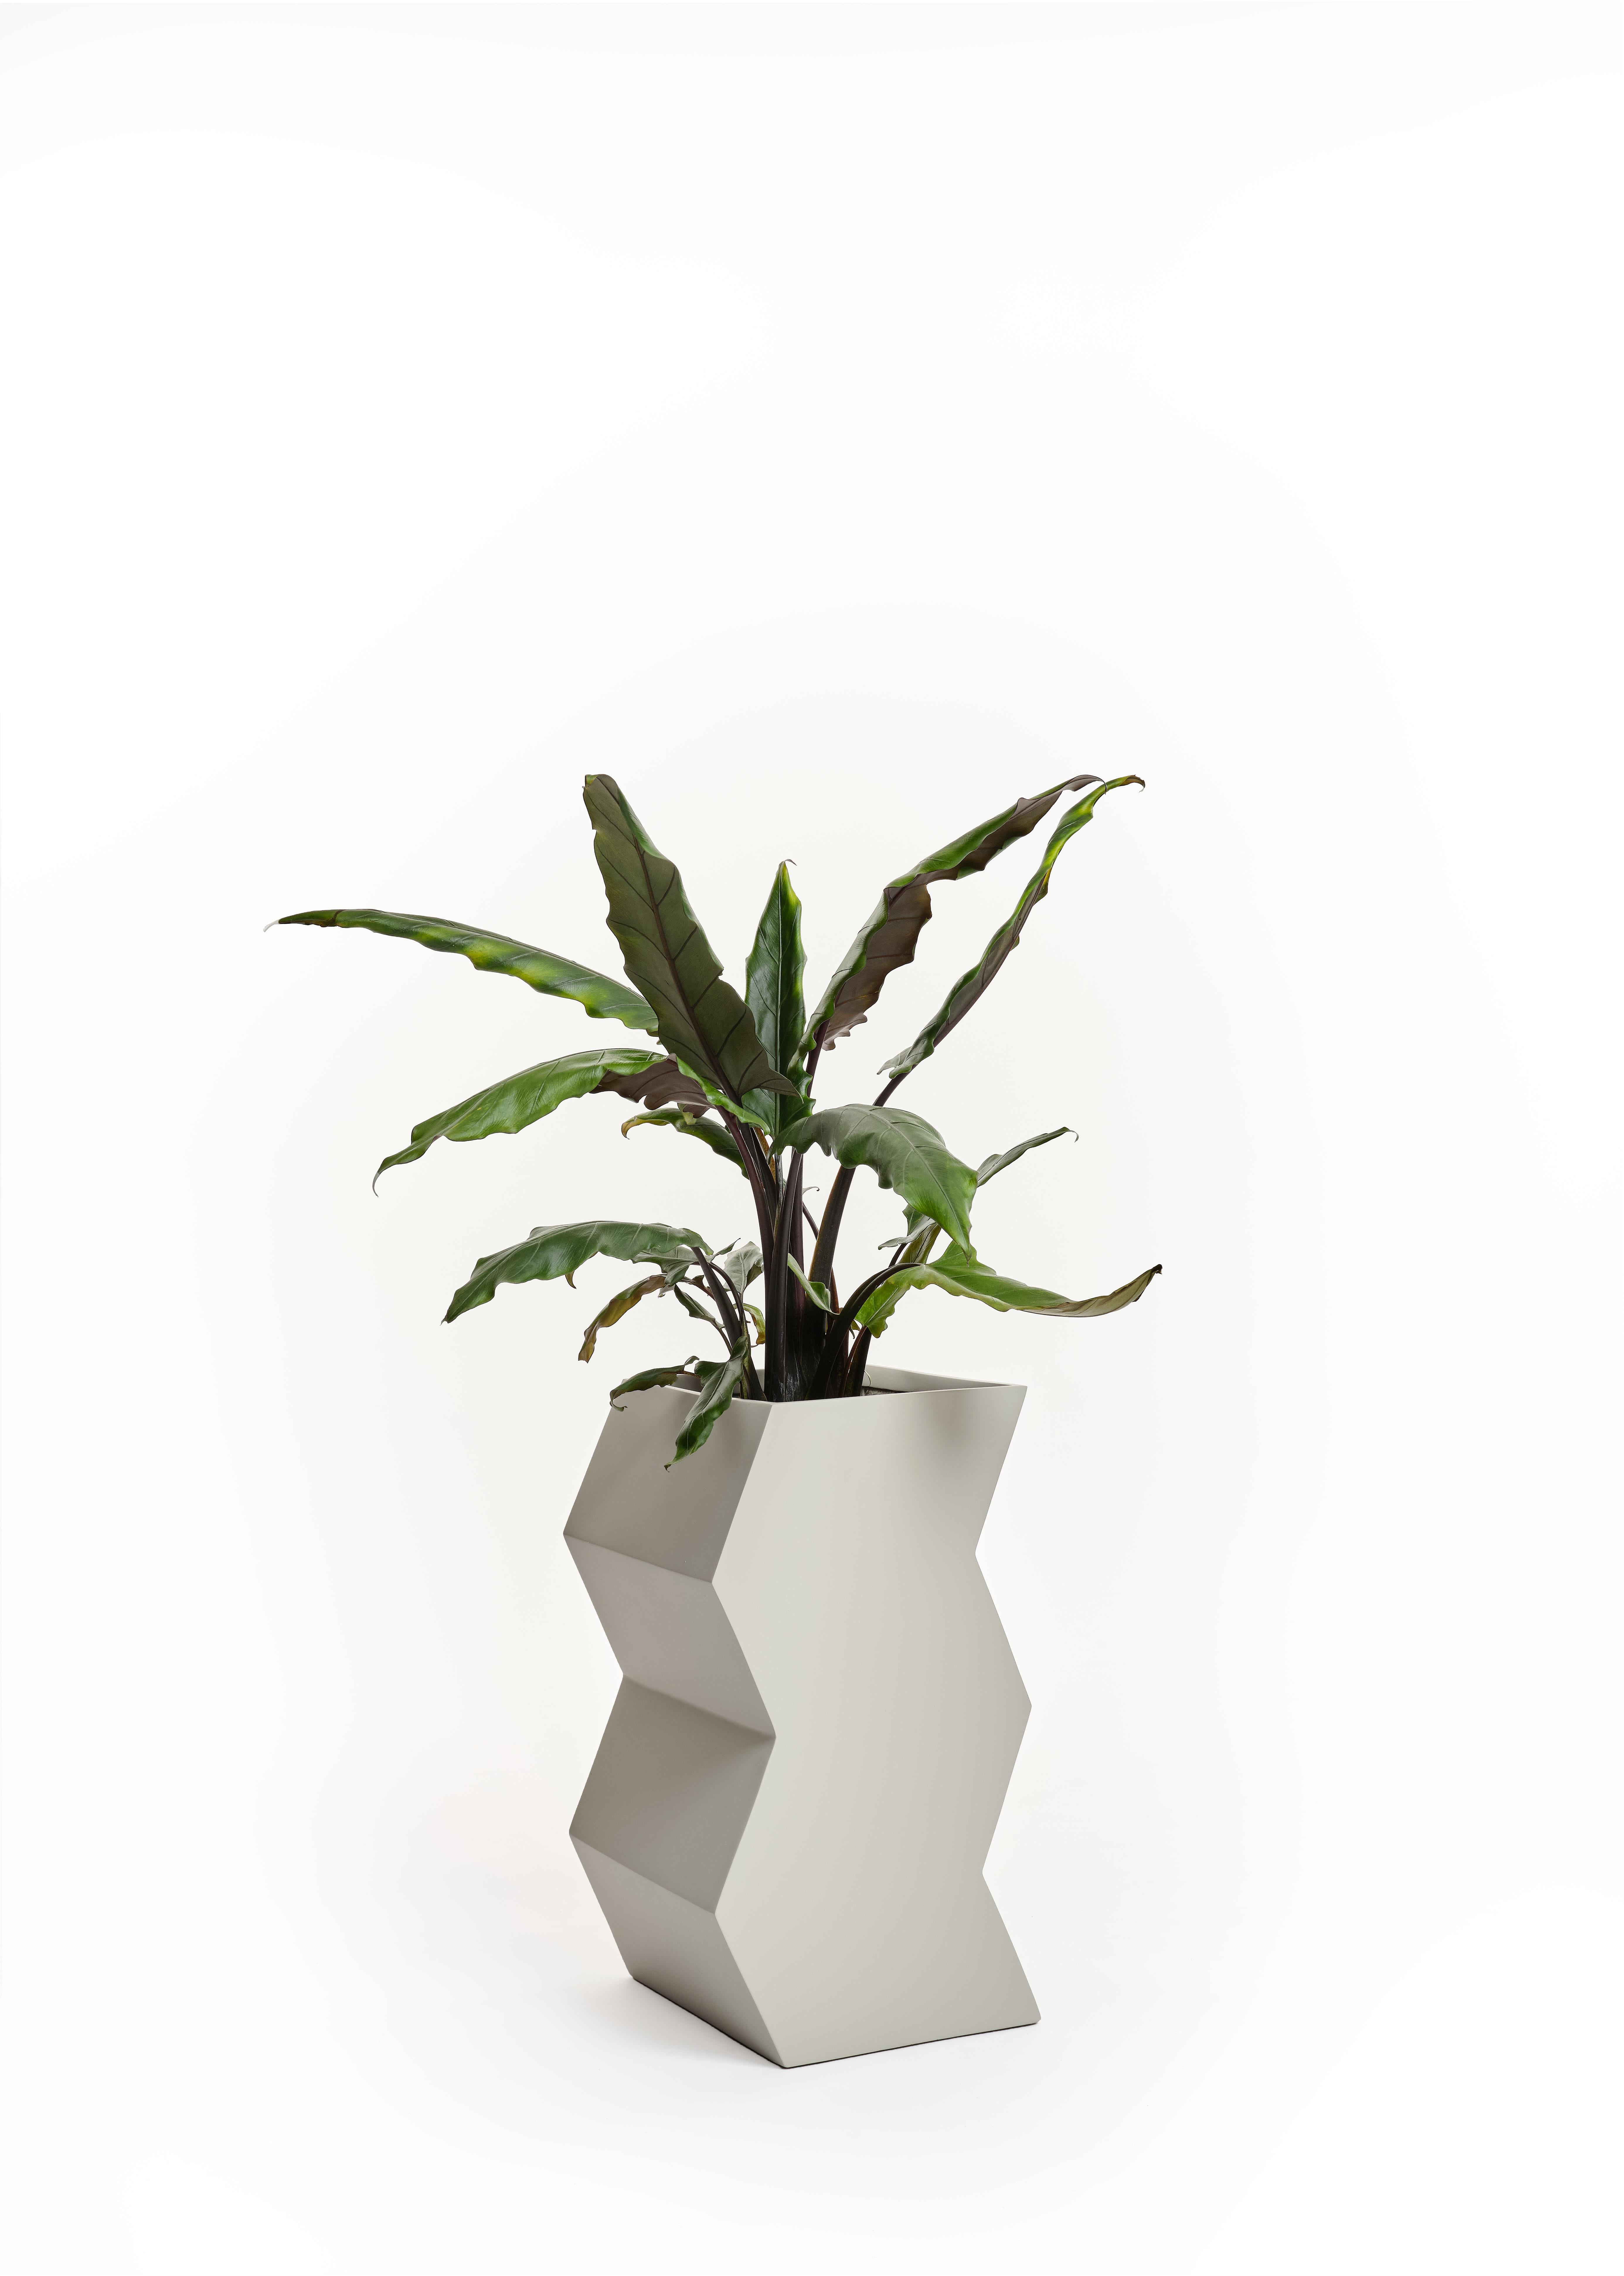 Fiberglass planters suitable for indoor or outdoor use. Made by hand in Vietnam. Lead time 8 weeks unless in stock.

Available in:
White
Mustard
Ash

Dimensions: H 22 in. x D 10 in. x W 10 in.
 